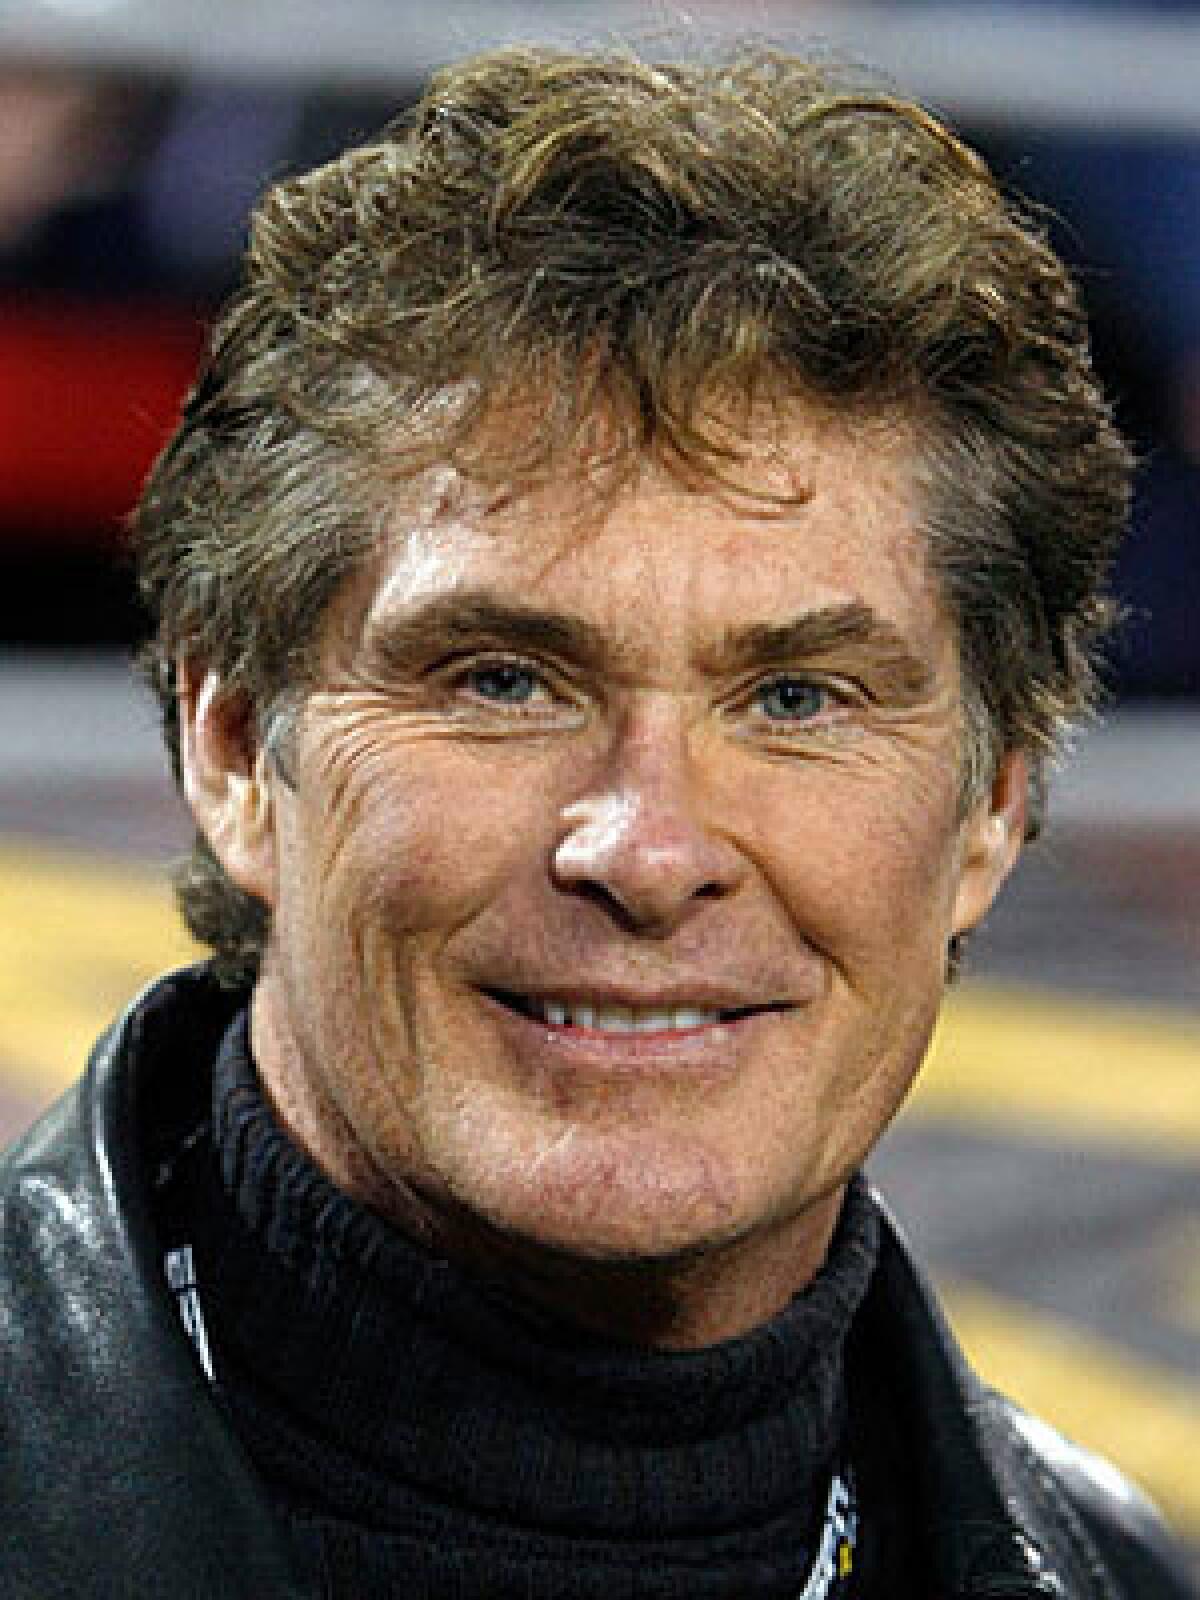 David Hasselhoff, 56, has listed his 9,770-square-foot home that has five bedrooms and 5 1/2 bathrooms.